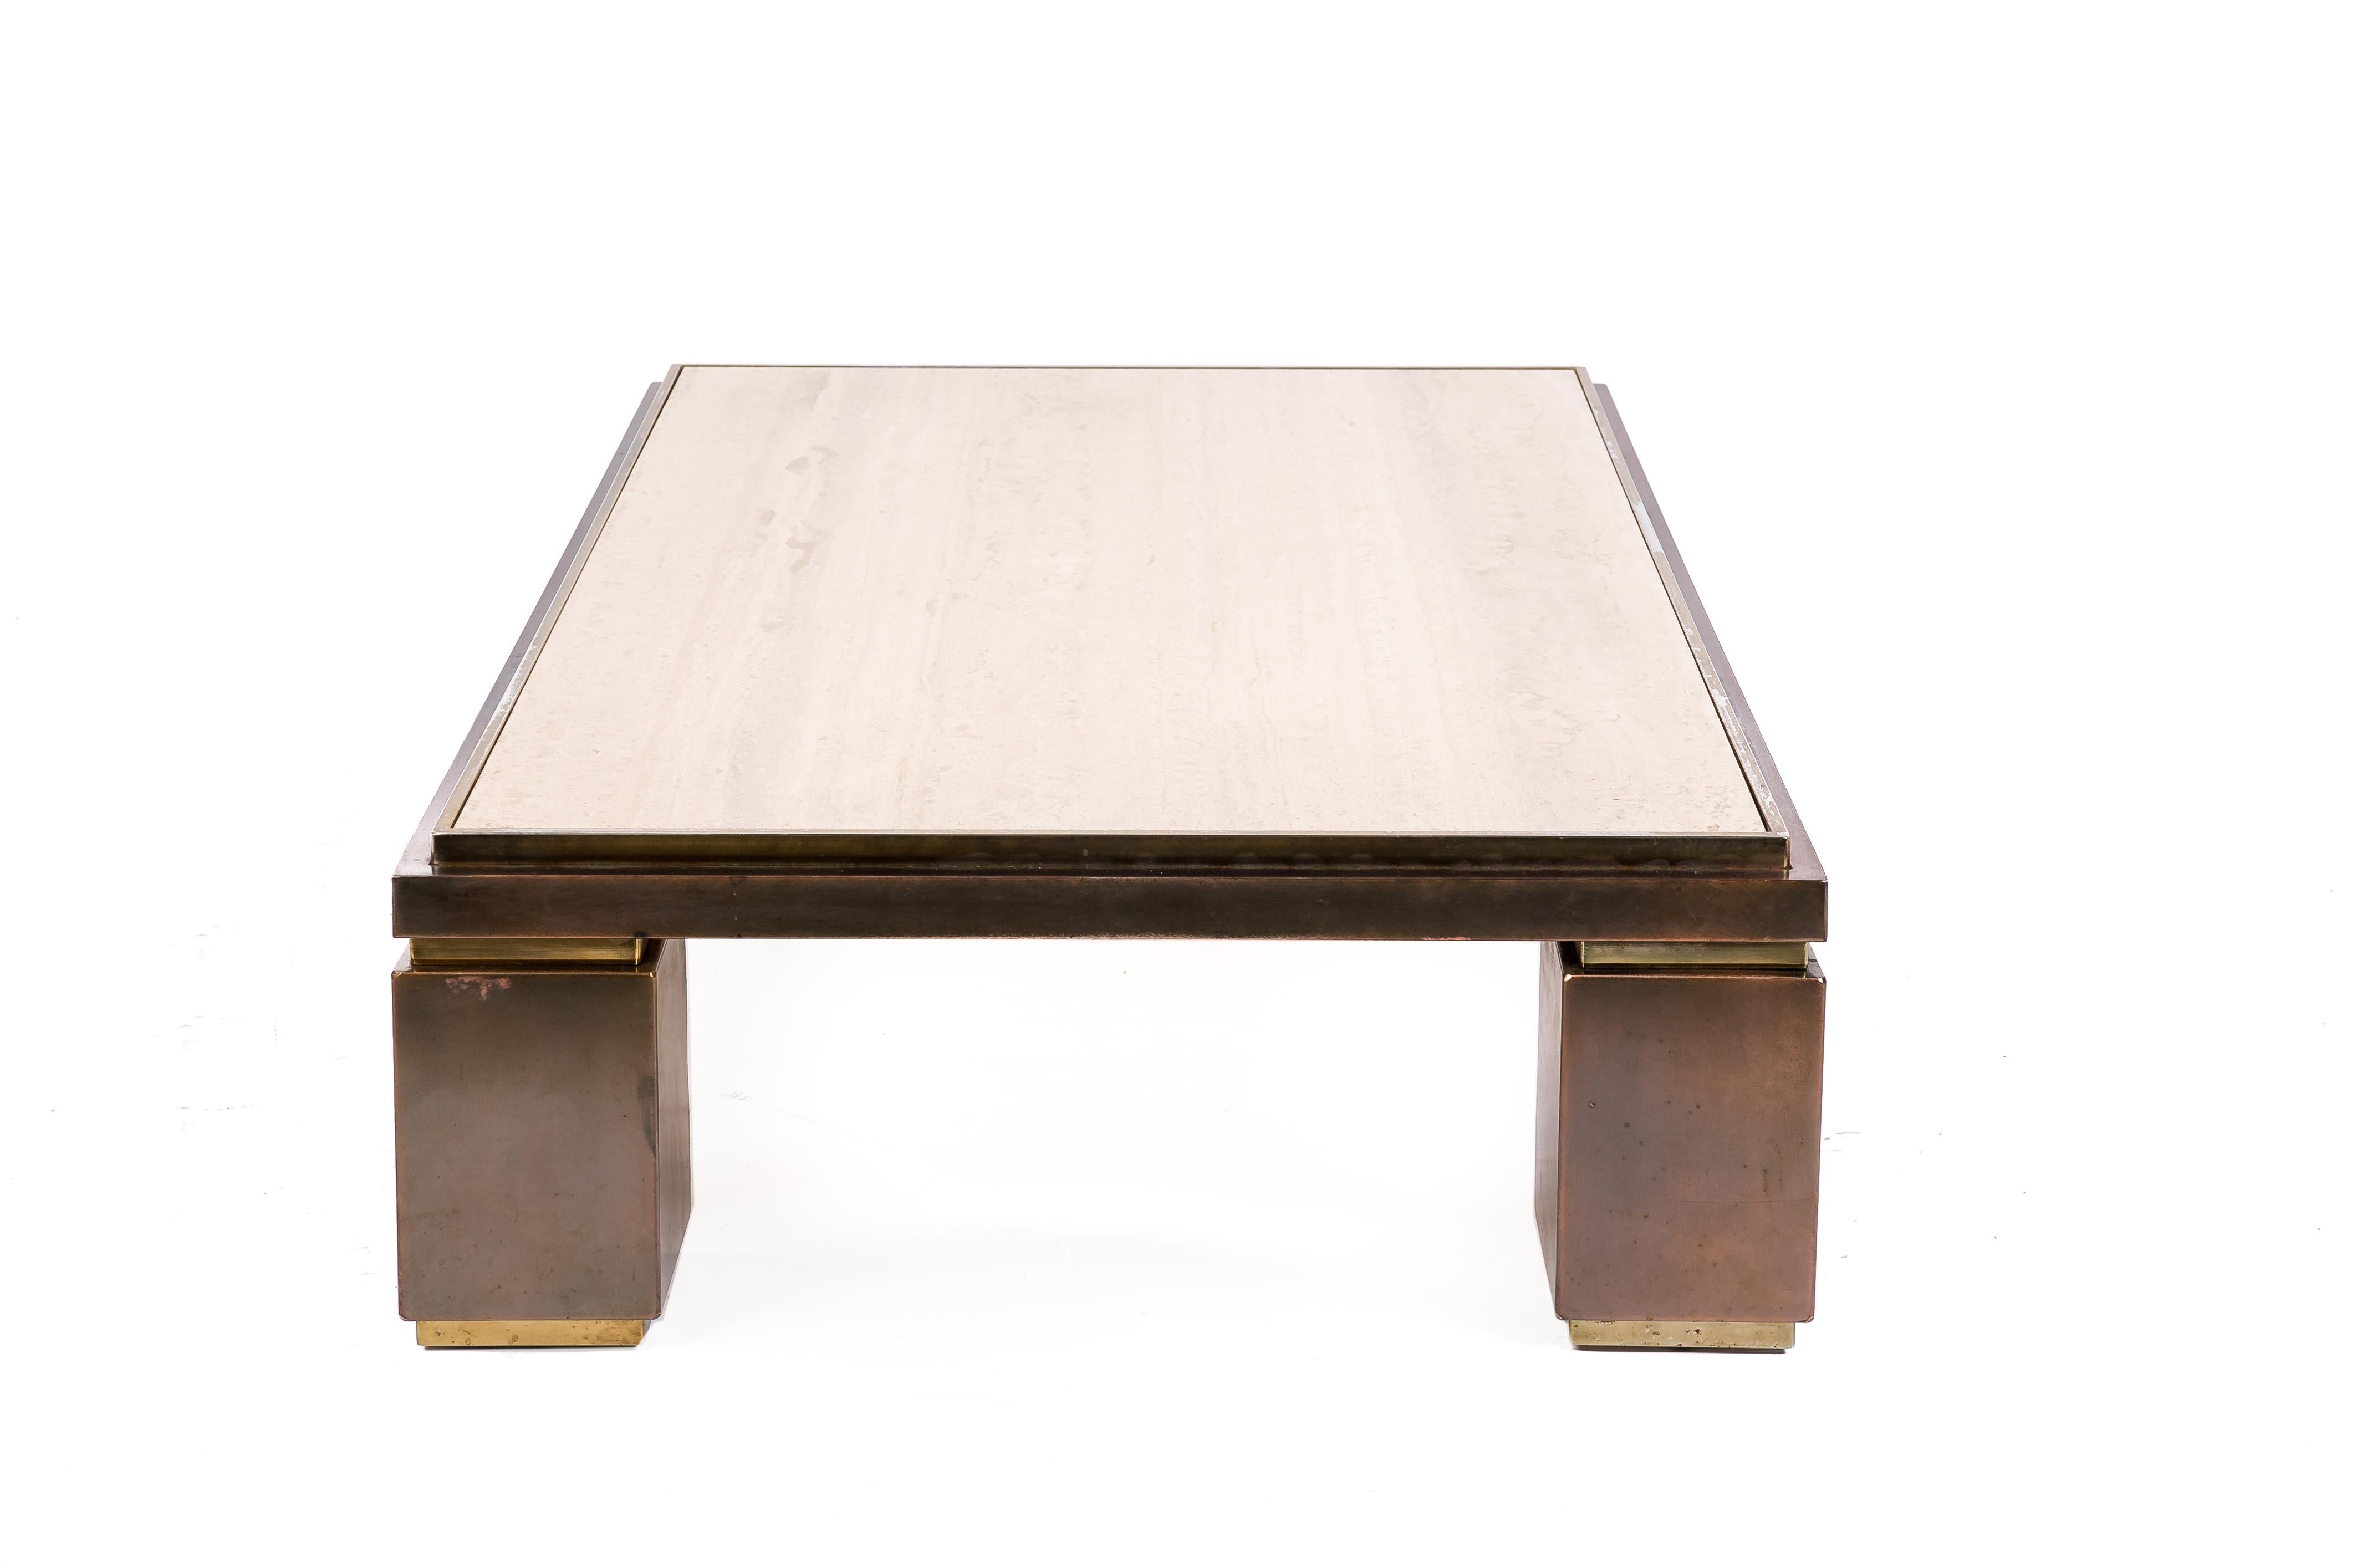 Belgian Hollywood Regency Travertine and Brass Coffee Table by Belgo Chrome, 1970s For Sale